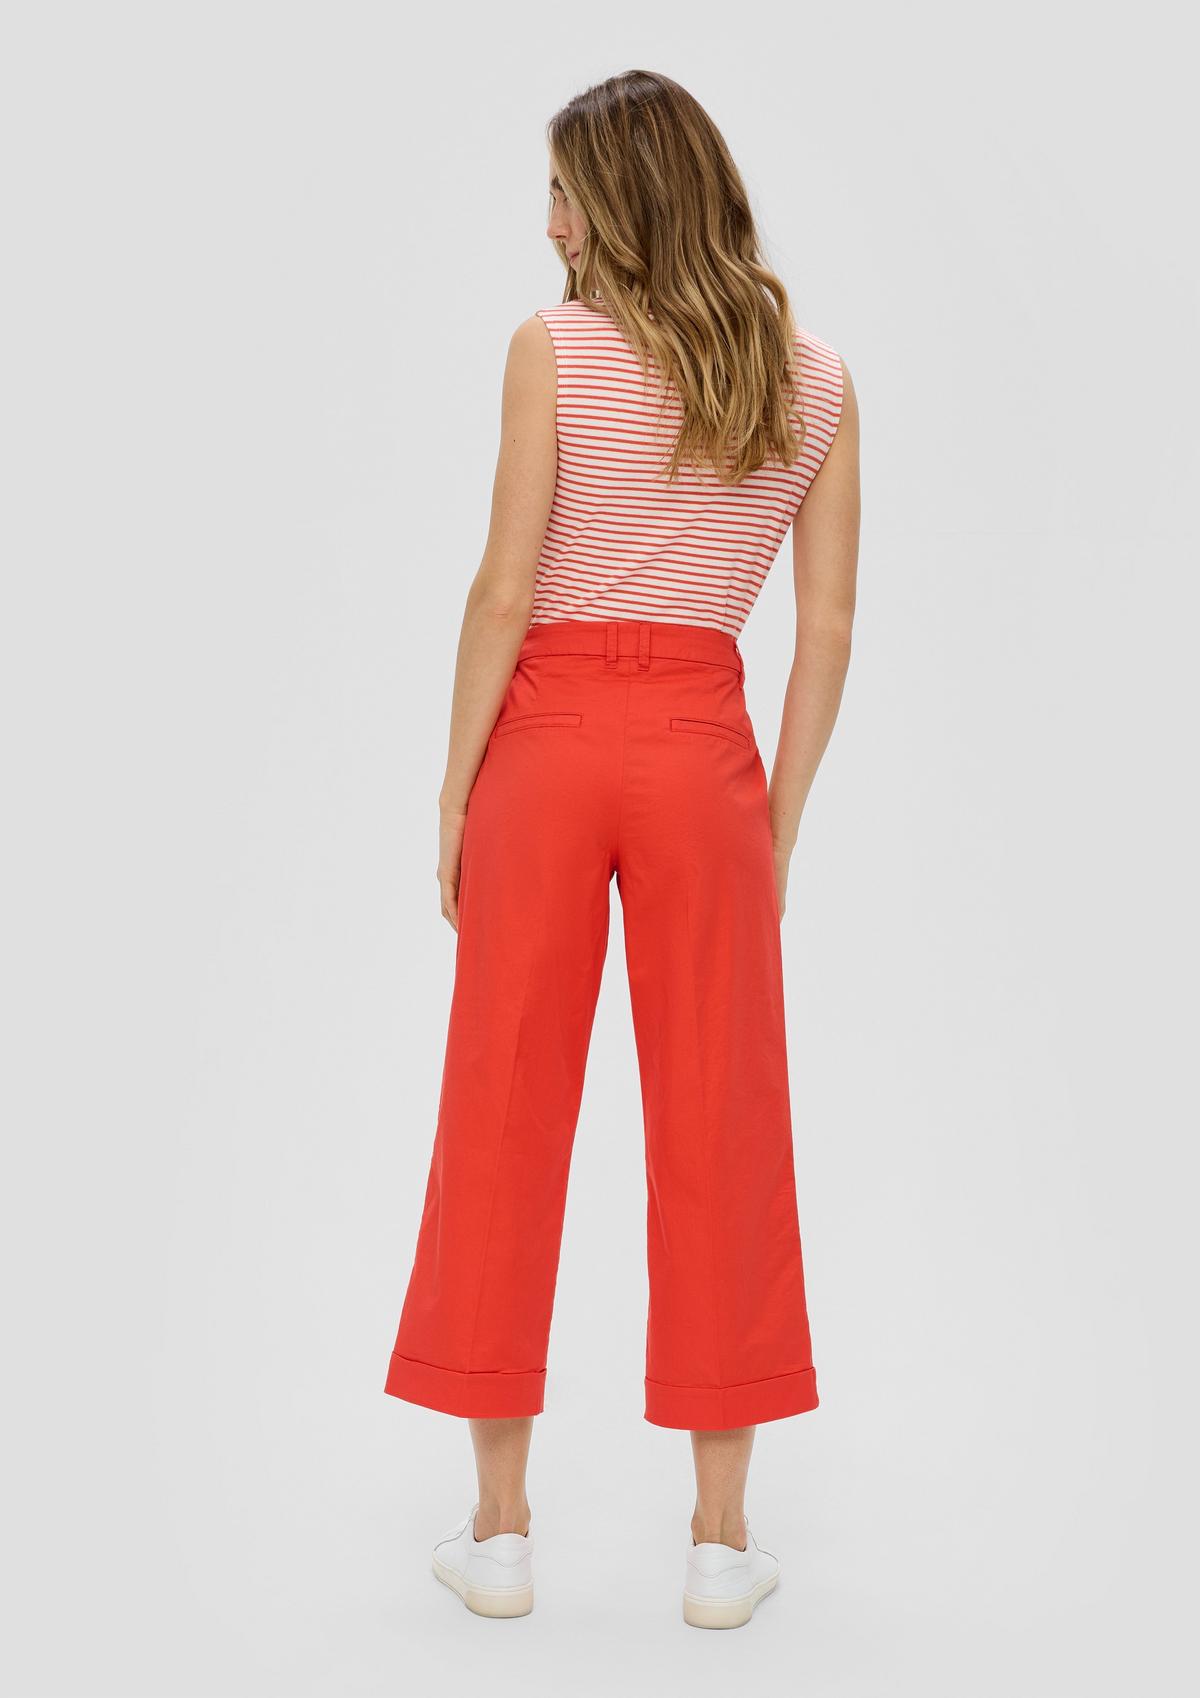 s.Oliver Culottes in stretch cotton